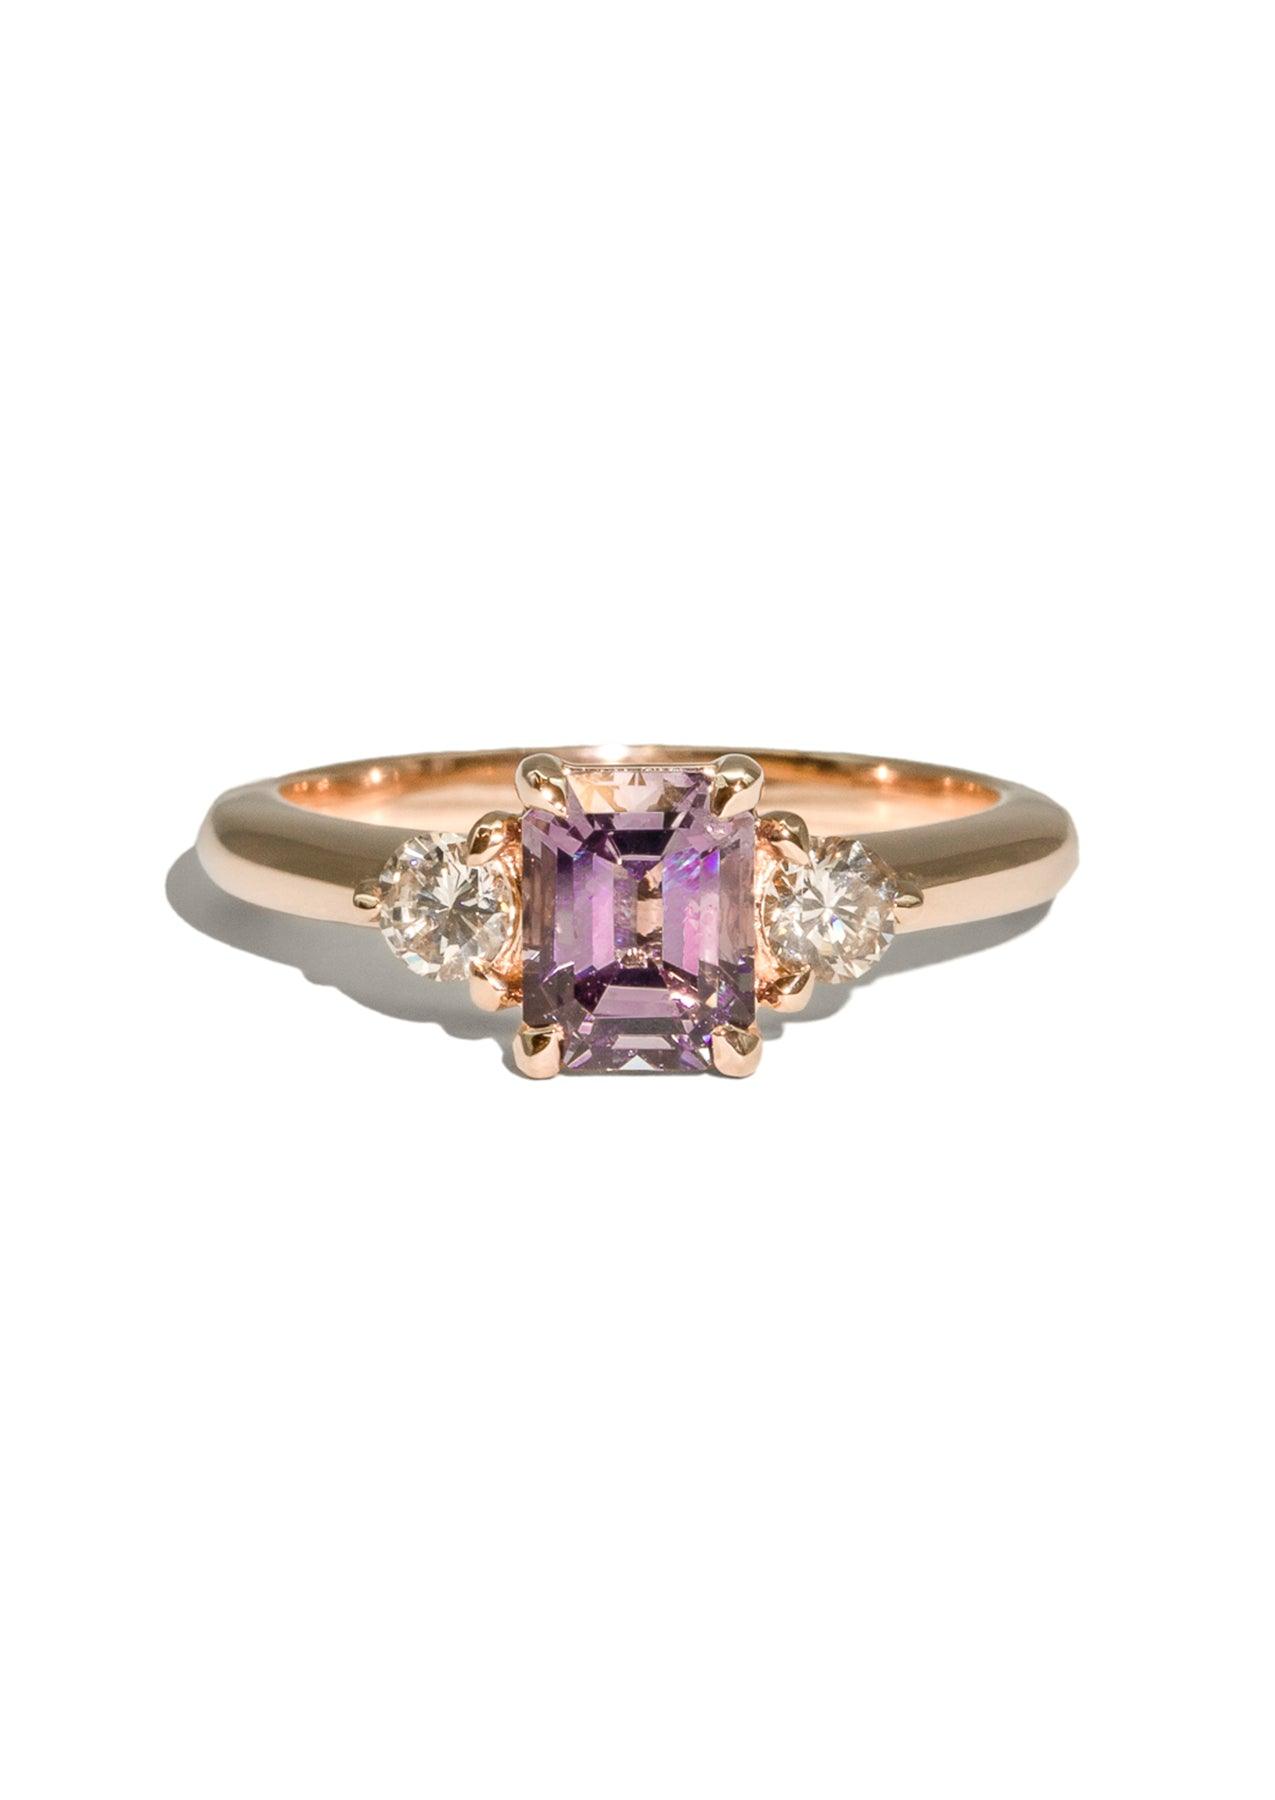 The Ada 1.32ct Spinel Ring